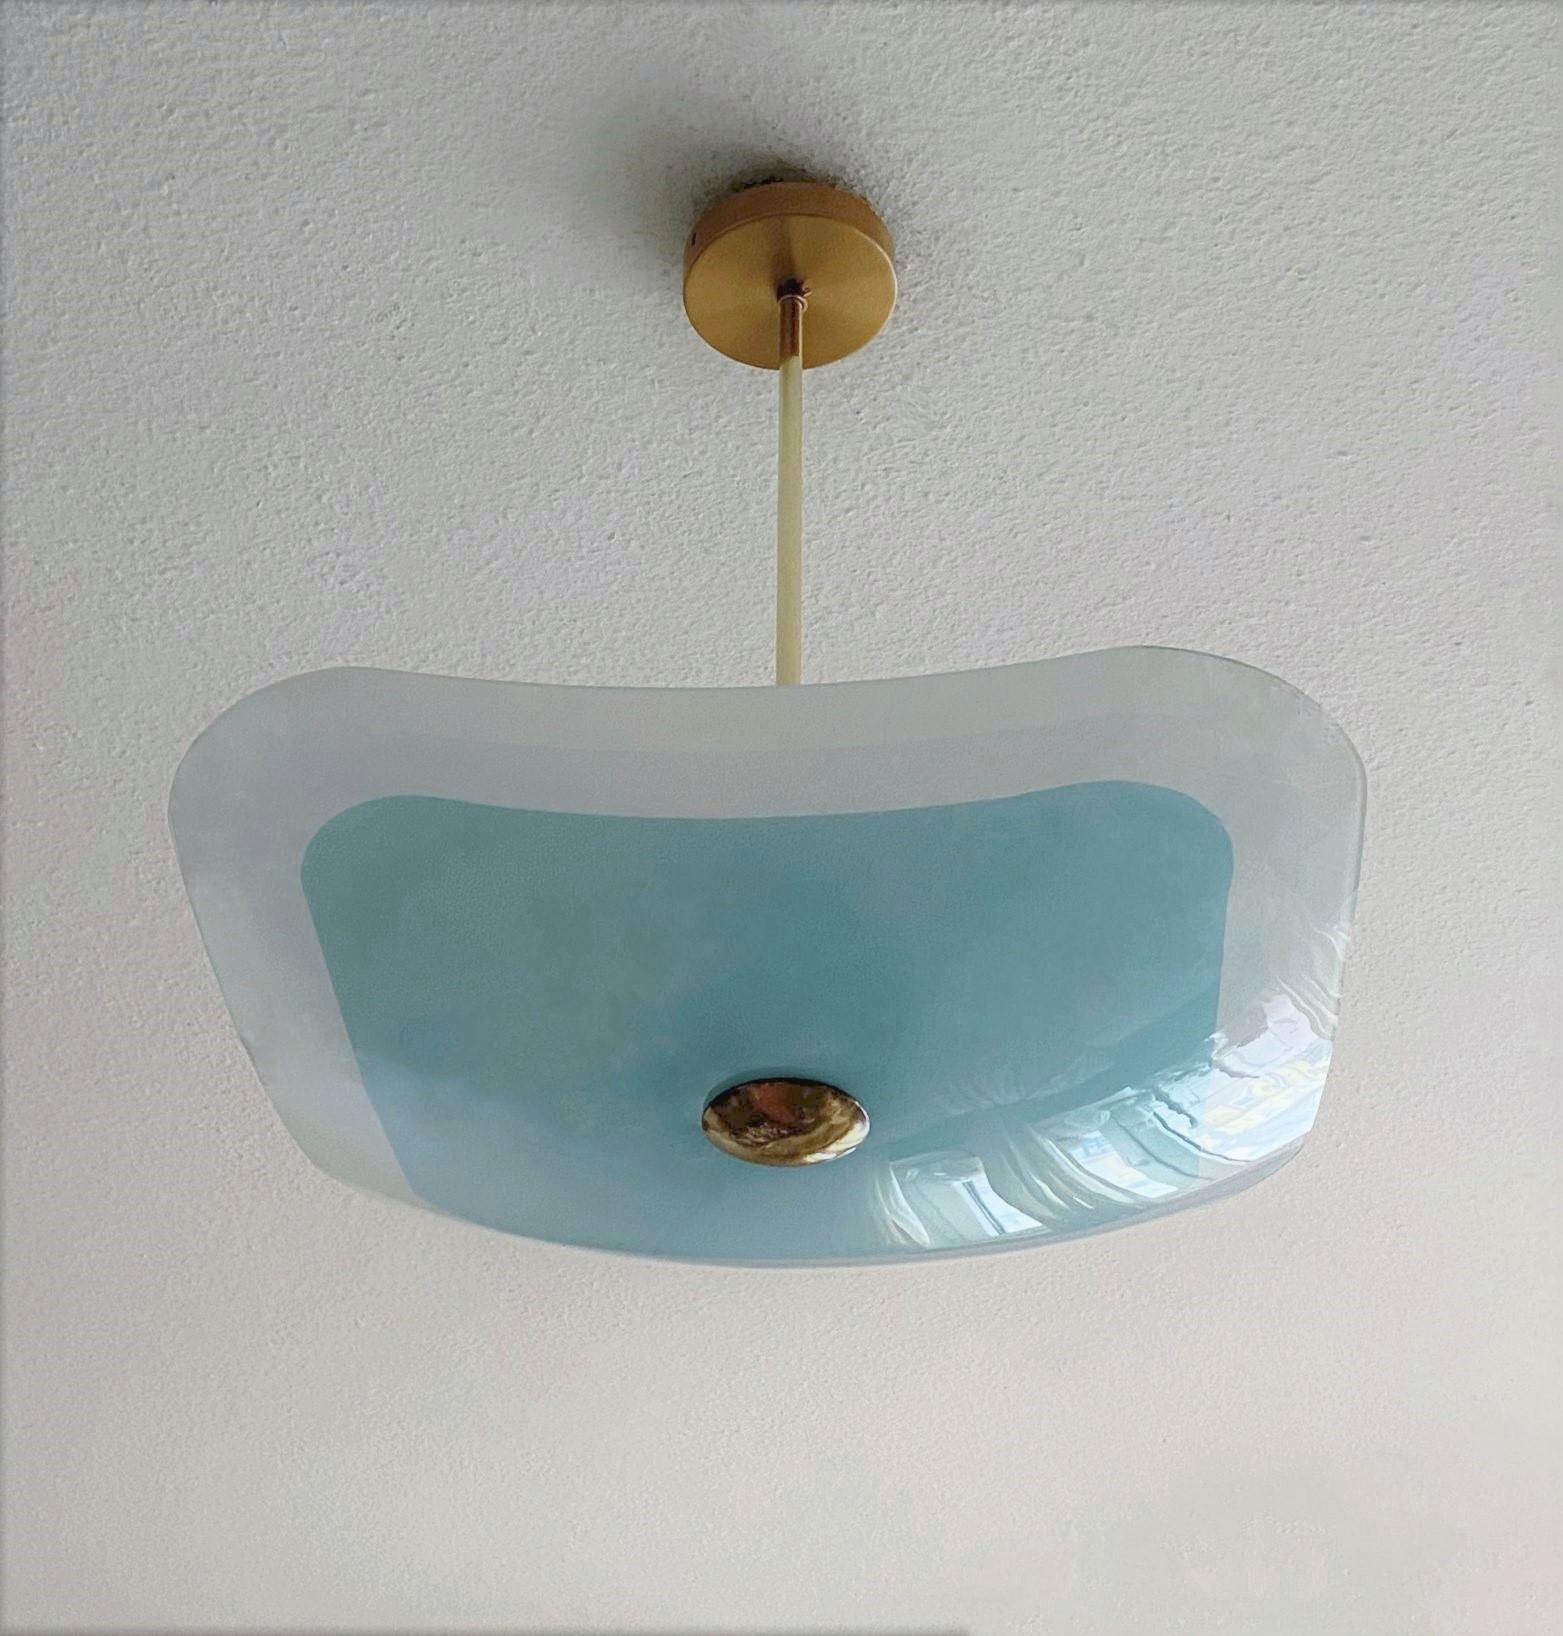 A Fontana Arte style opalescent glass two-light chandelier or flush mount, Italy, 1950s. Large curved quare turquoise and white opalescent glass shade with brass mounts. This chandelier can also be used as flush mount on the ceiling. The glass is in